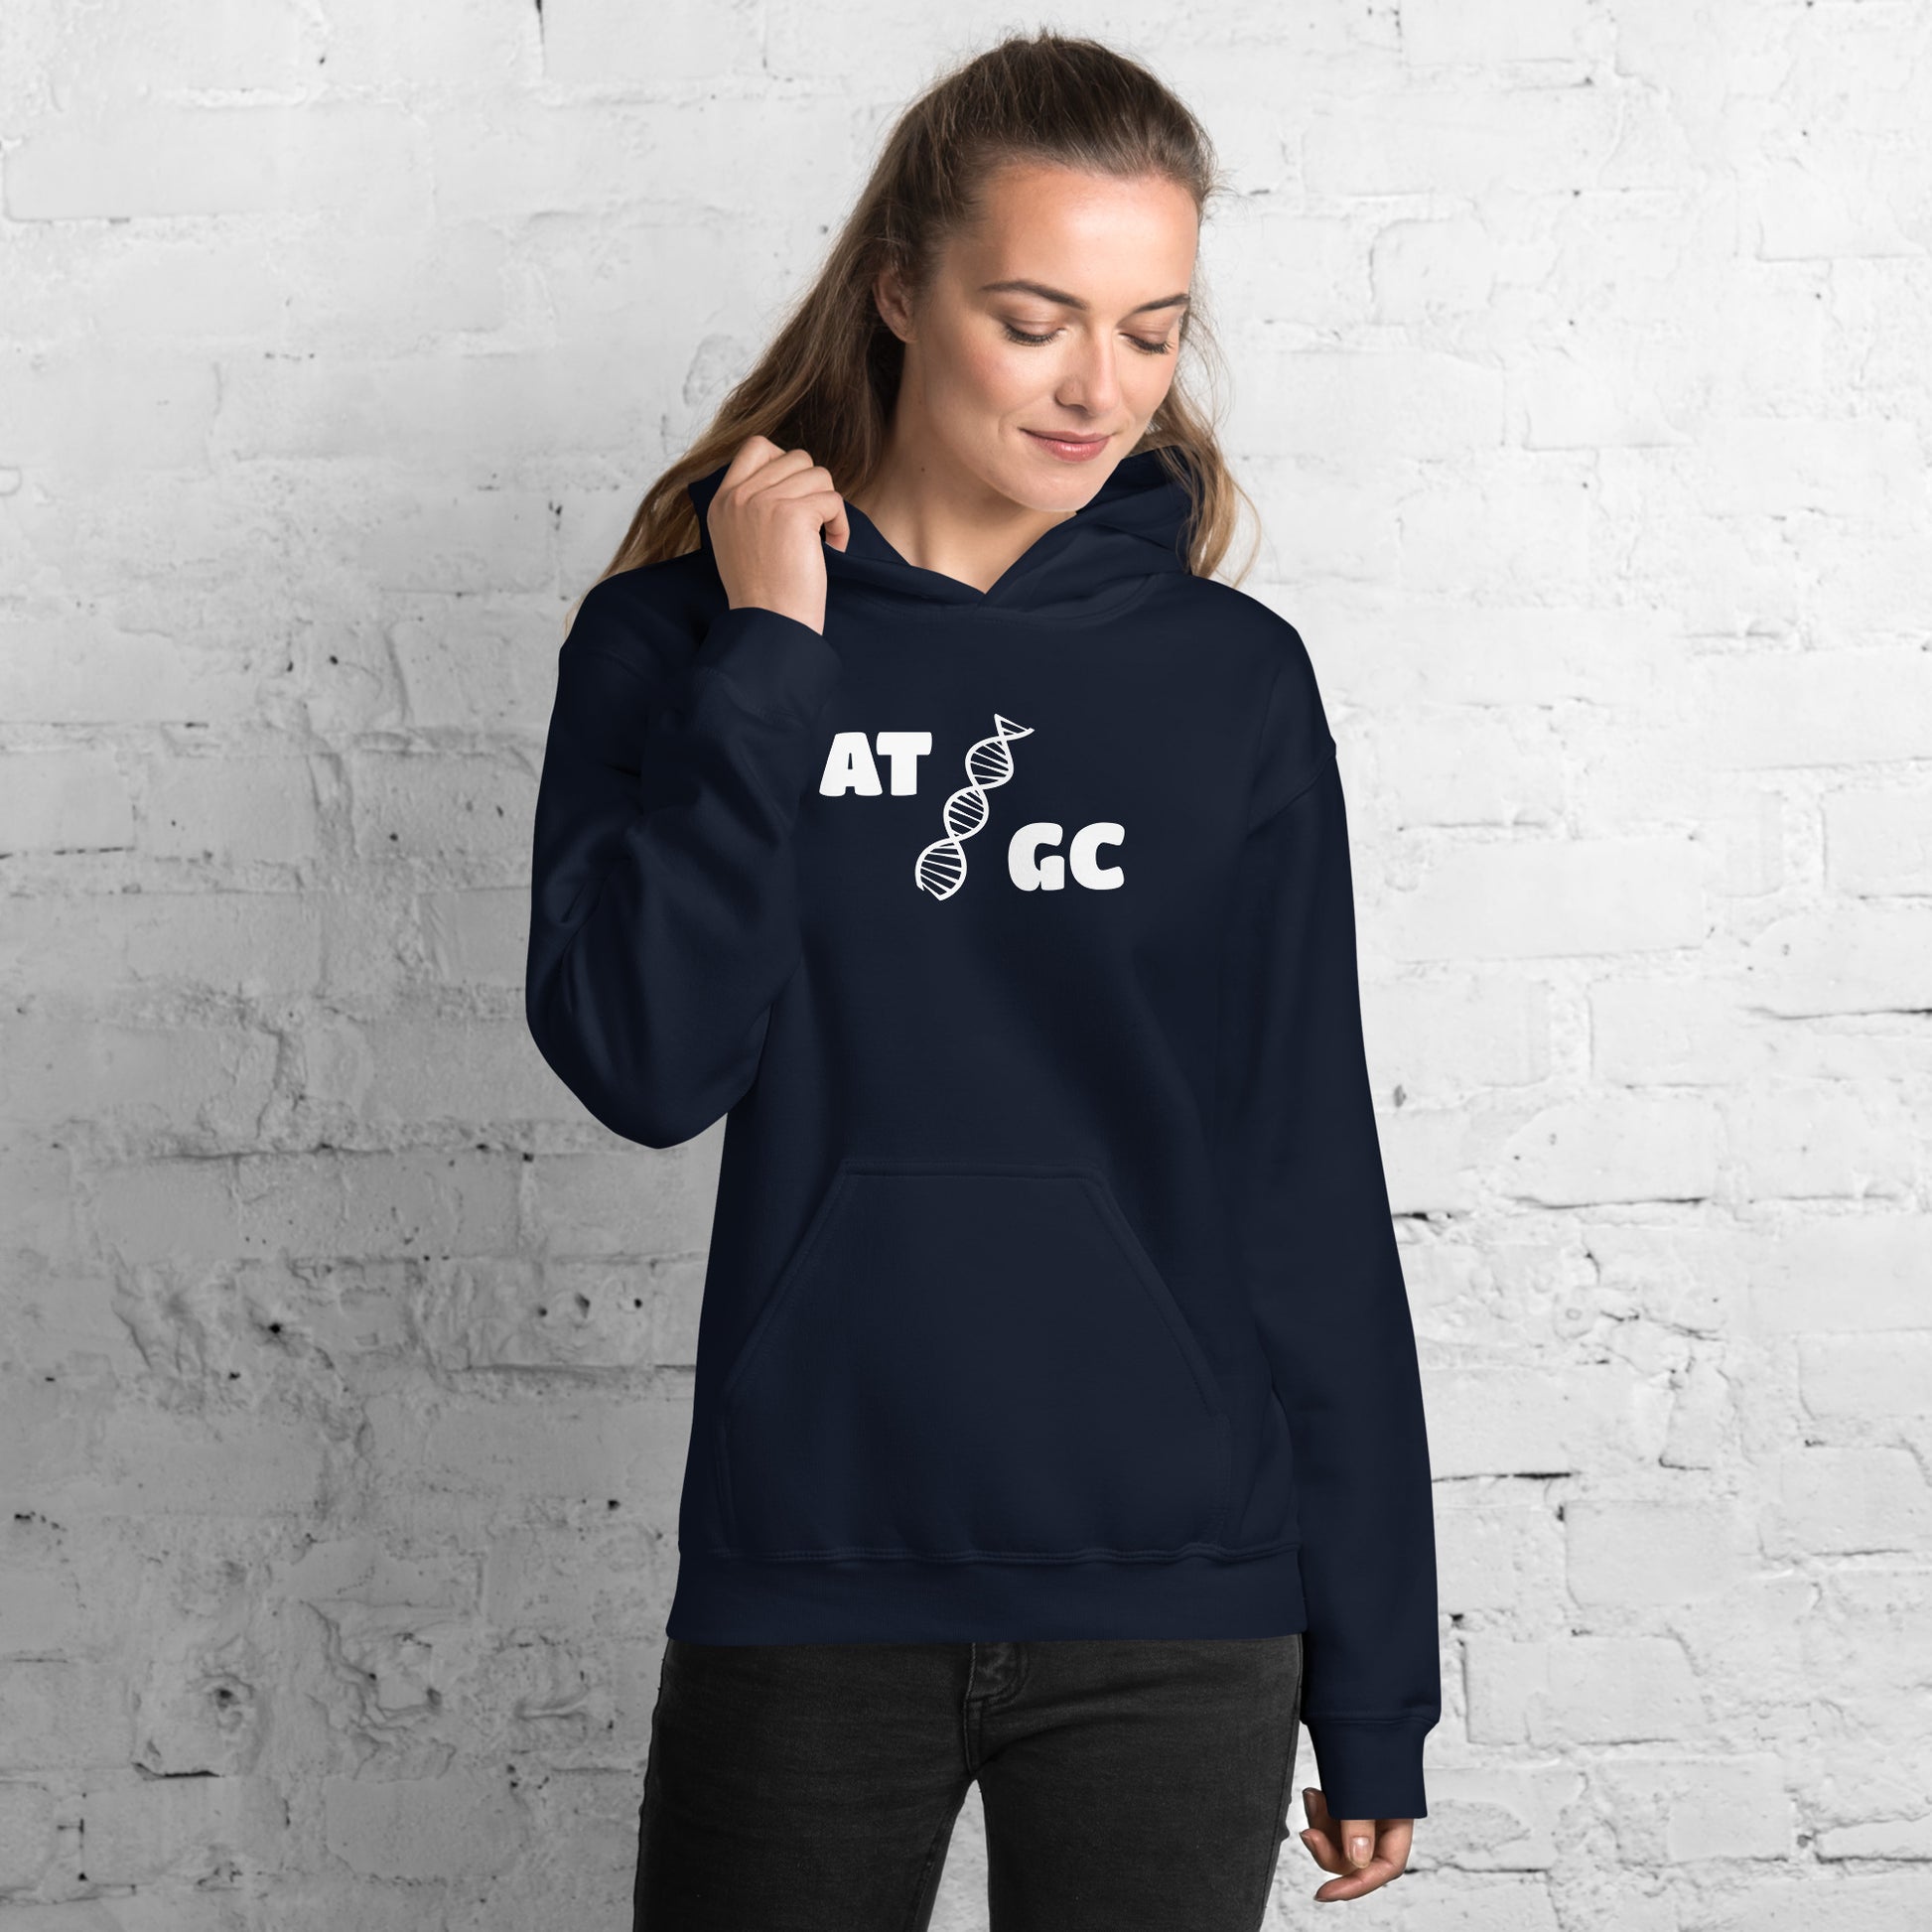 Women with navy blue hoodie with image of a DNA string and the text "ATGC"